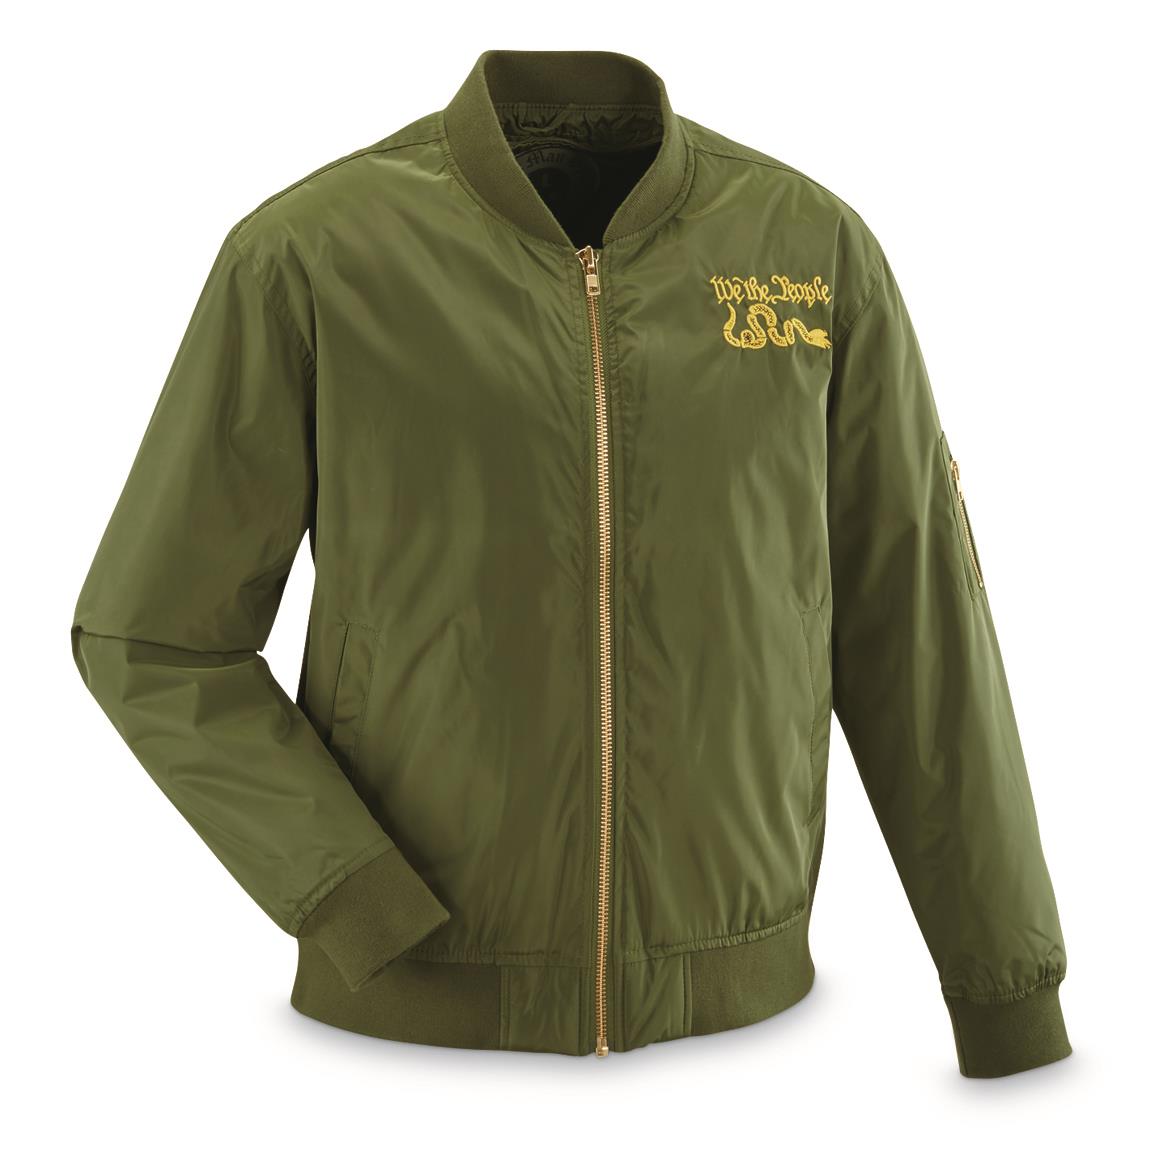 TheManSpot Embroidered We the People Bomber Jacket, Green